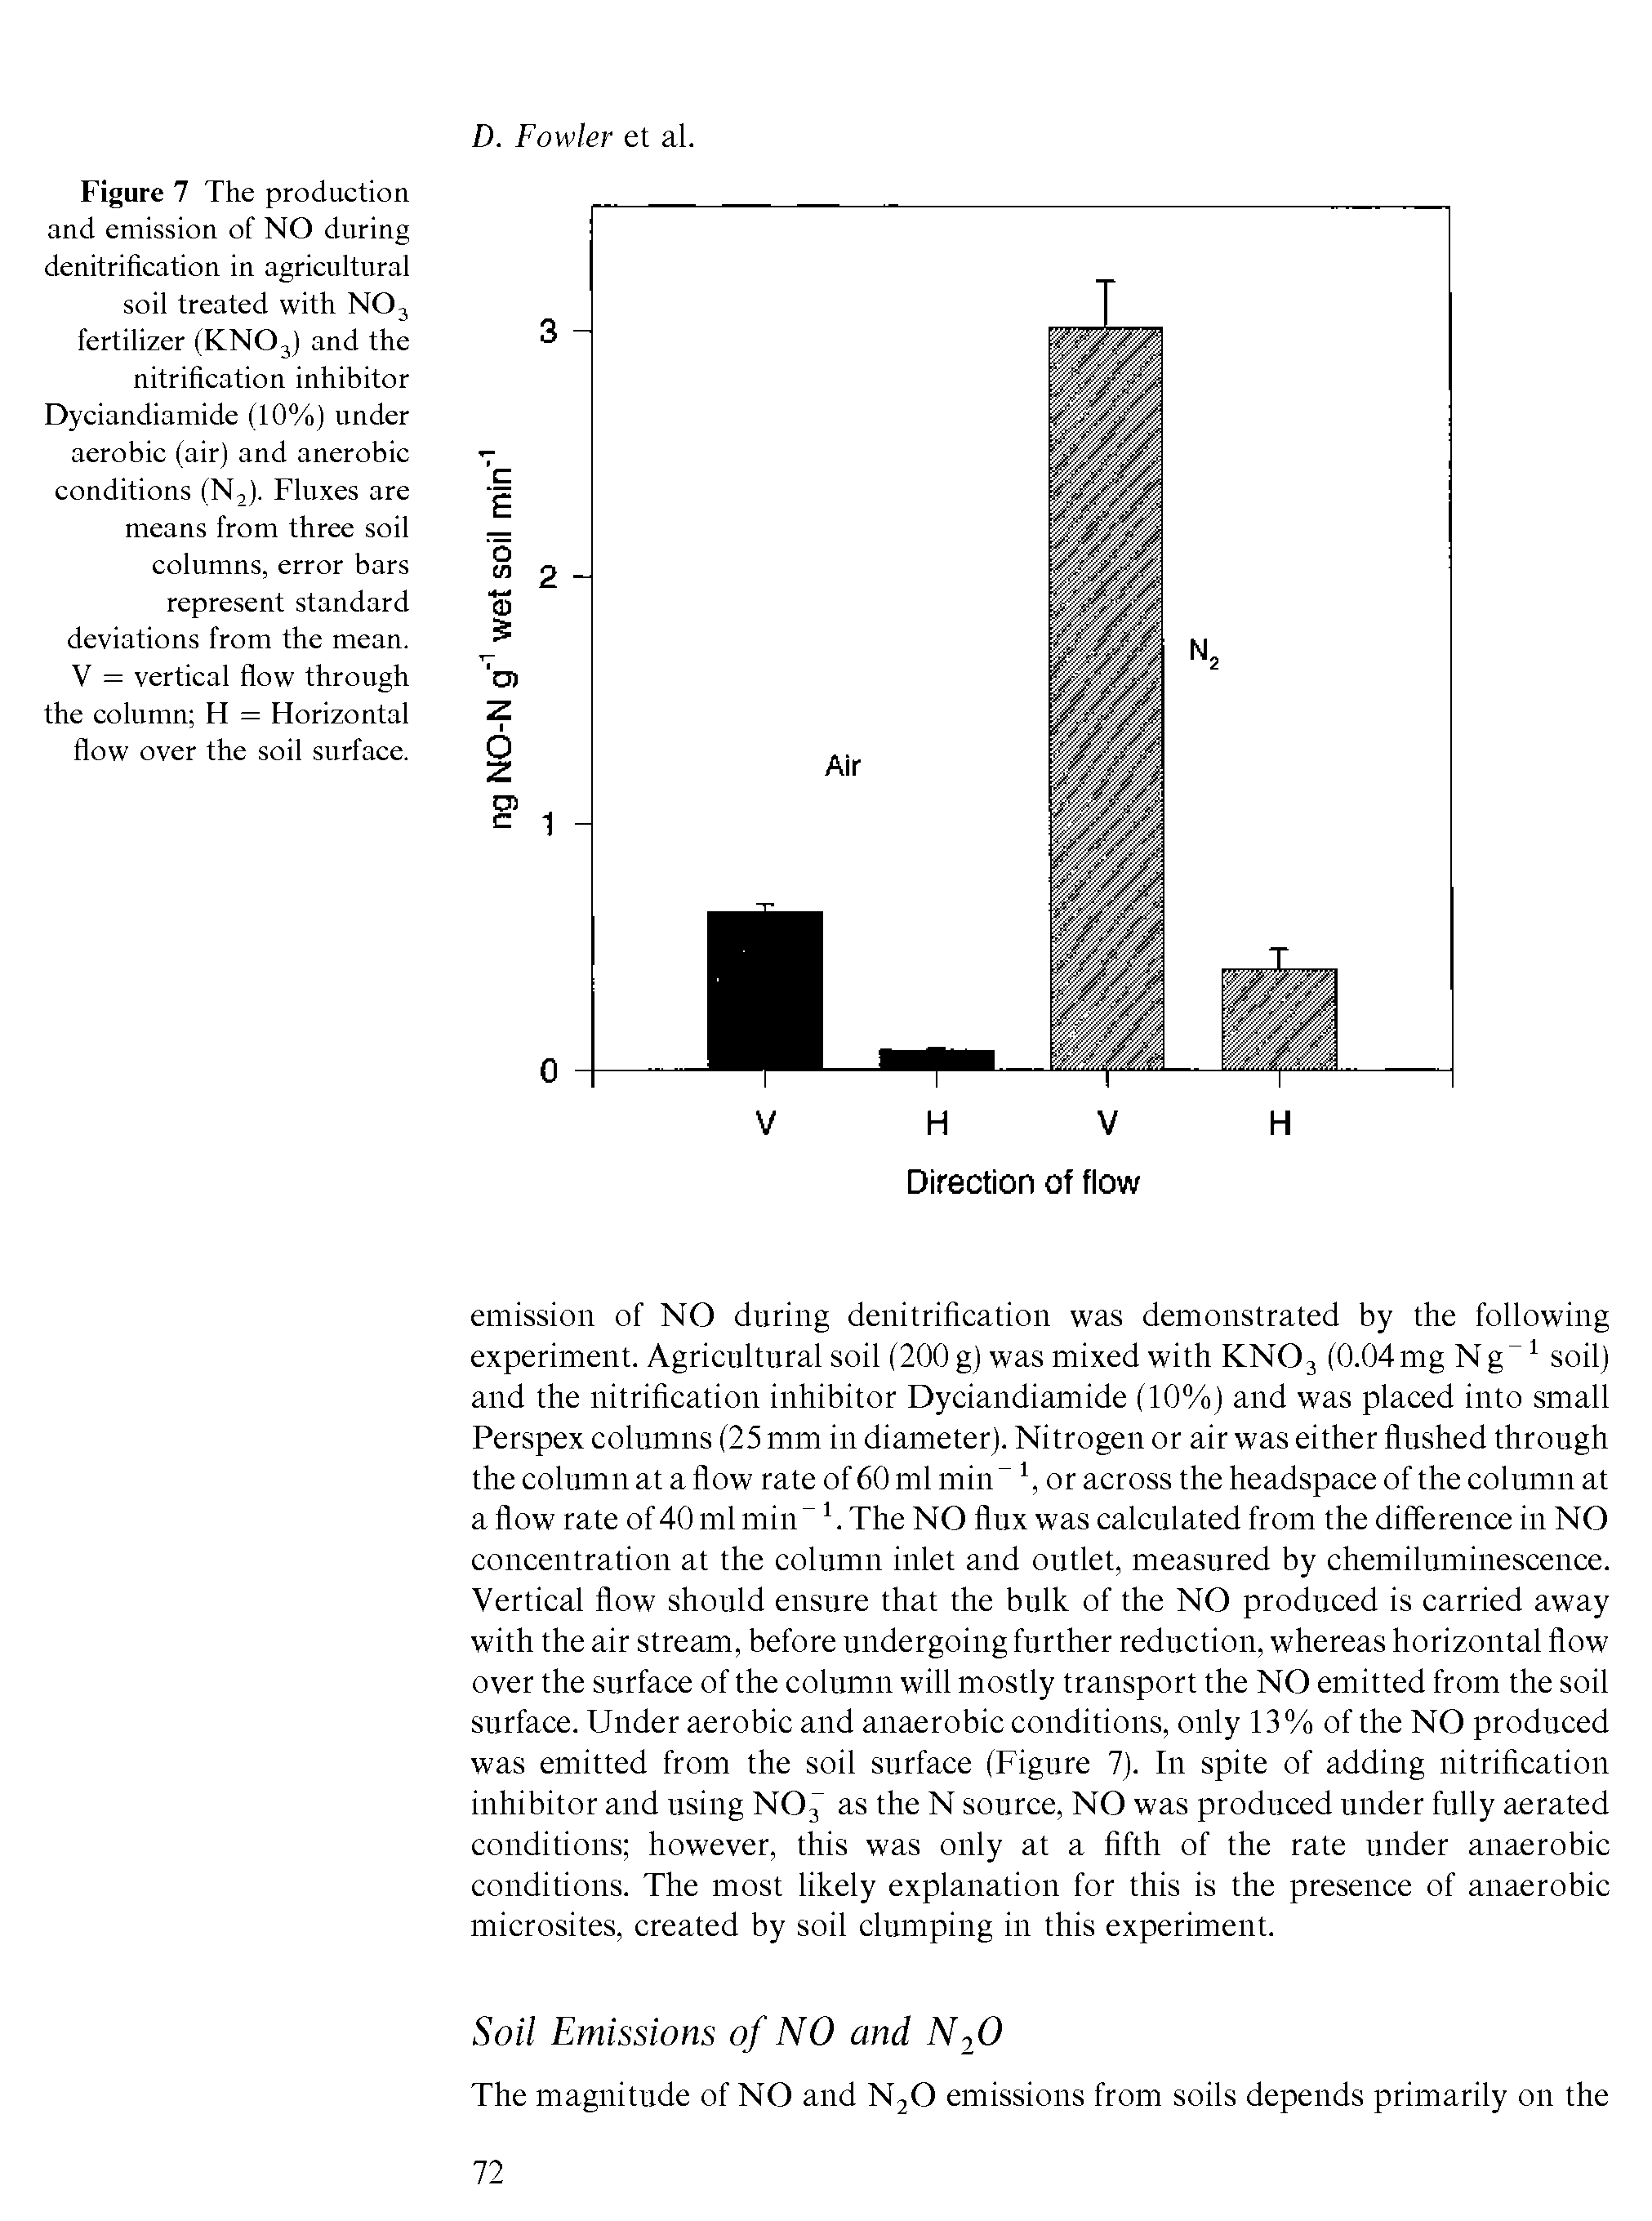 Figure 7 The production and emission of NO during denitrification in agricultural soil treated with NO3 fertilizer (KNO3) and the nitrification inhibitor Dyciandiamide (10%) under aerobic (air) and anerobic conditions (N,). Fluxes are means from three soil columns, error bars represent standard deviations from the mean. V = vertical flow through the column H = Horizontal flow over the soil surface.